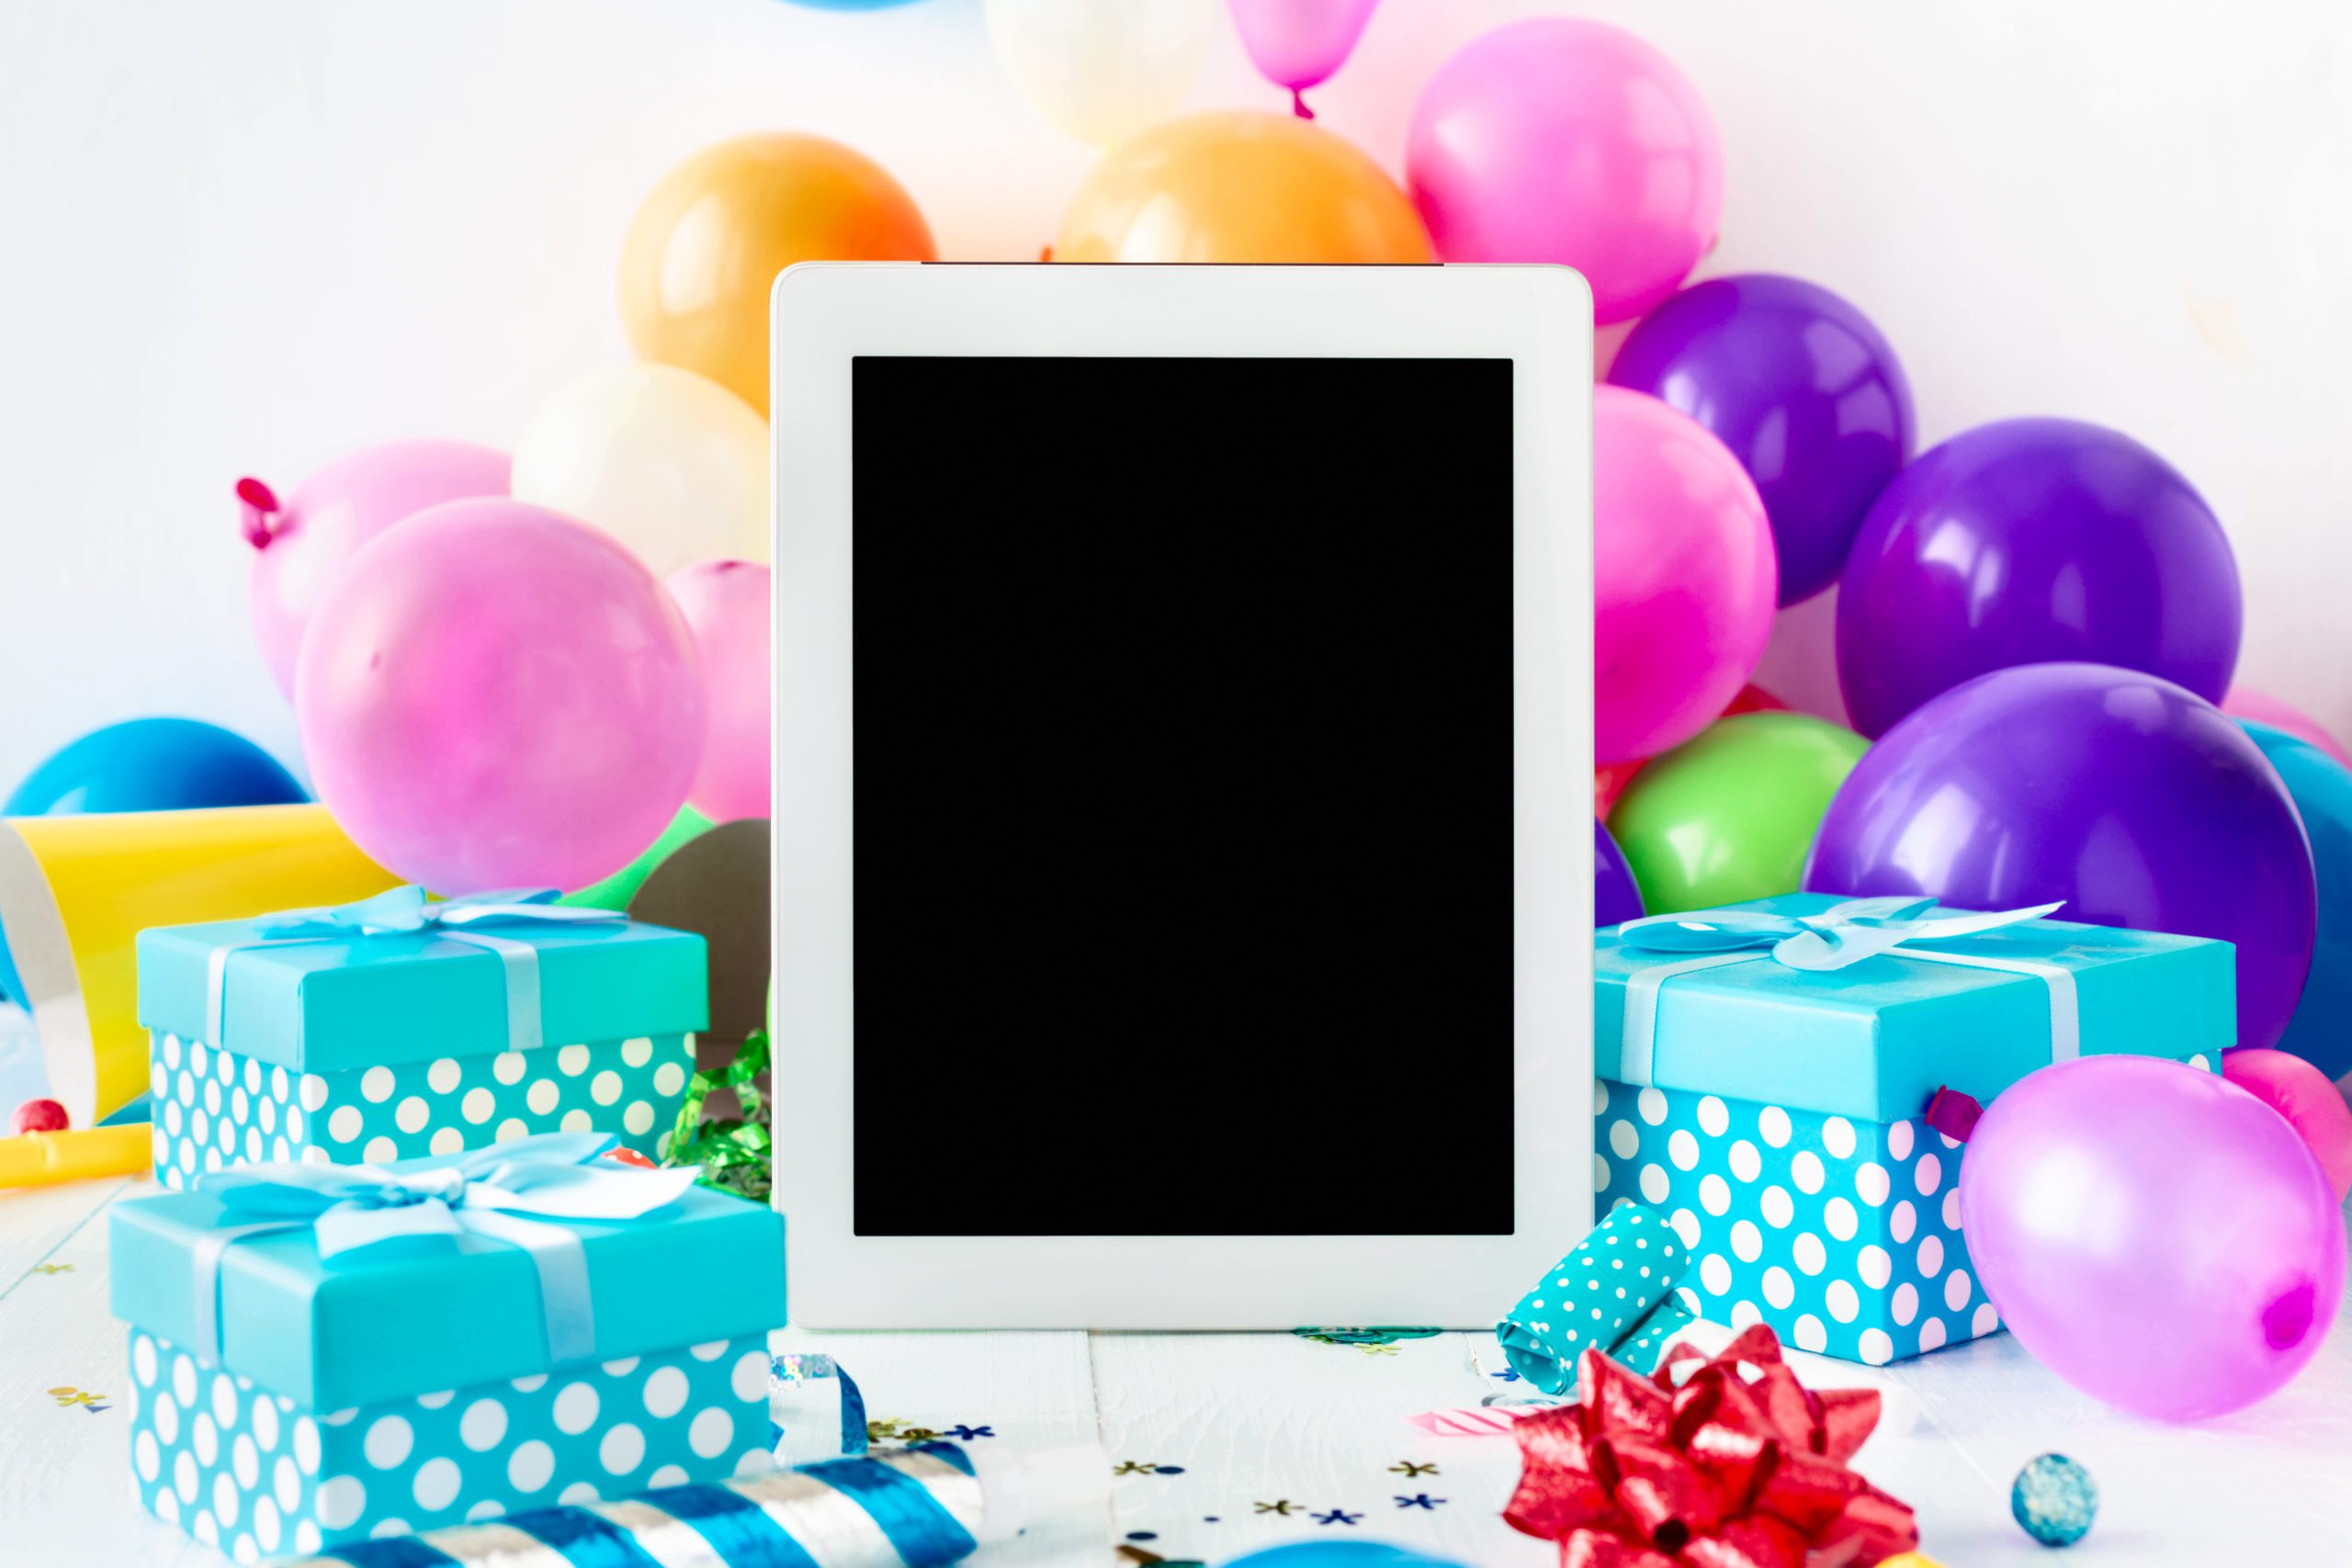 virtual birthday party with a blank tablet screen on a table among balloons and presents